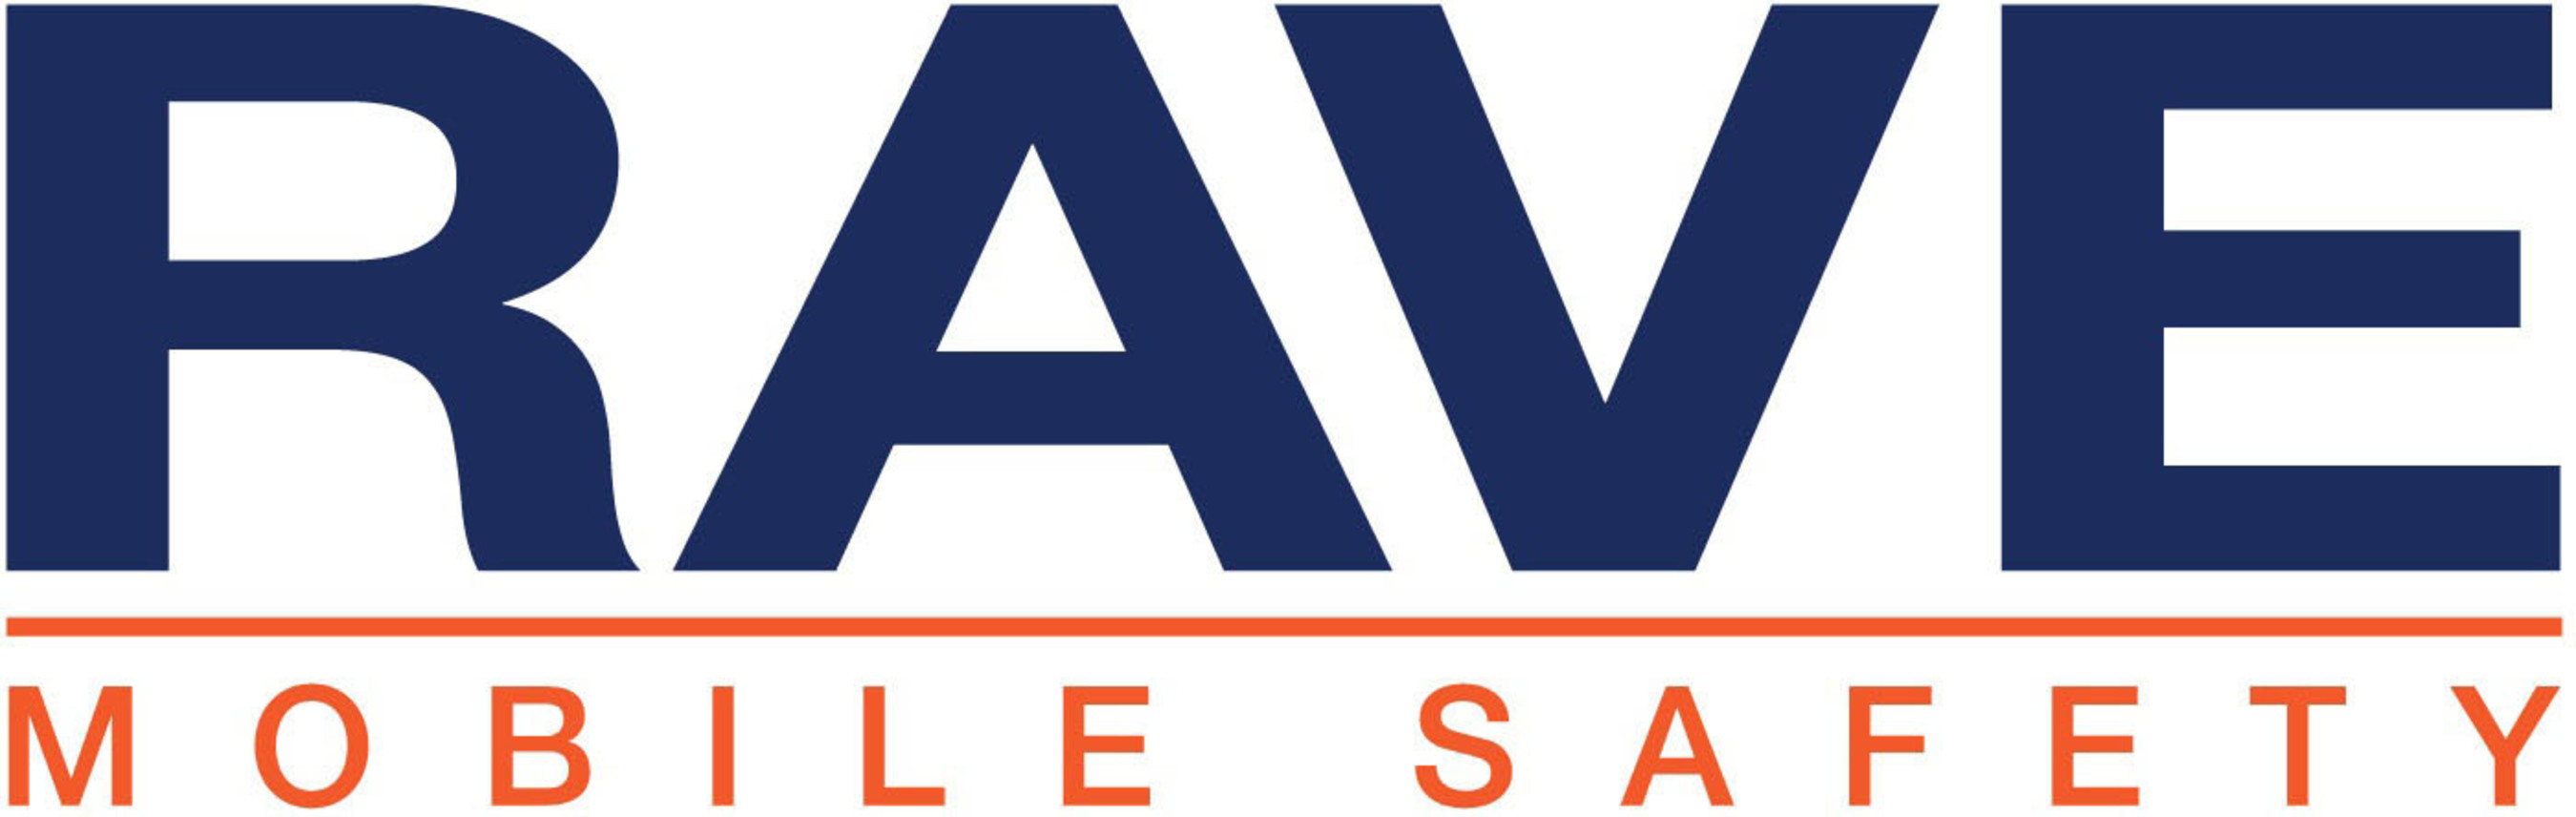 Rave Mobile Safety is the most trusted safety software partner, providing innovative communication software for better emergency preparedness and faster response.